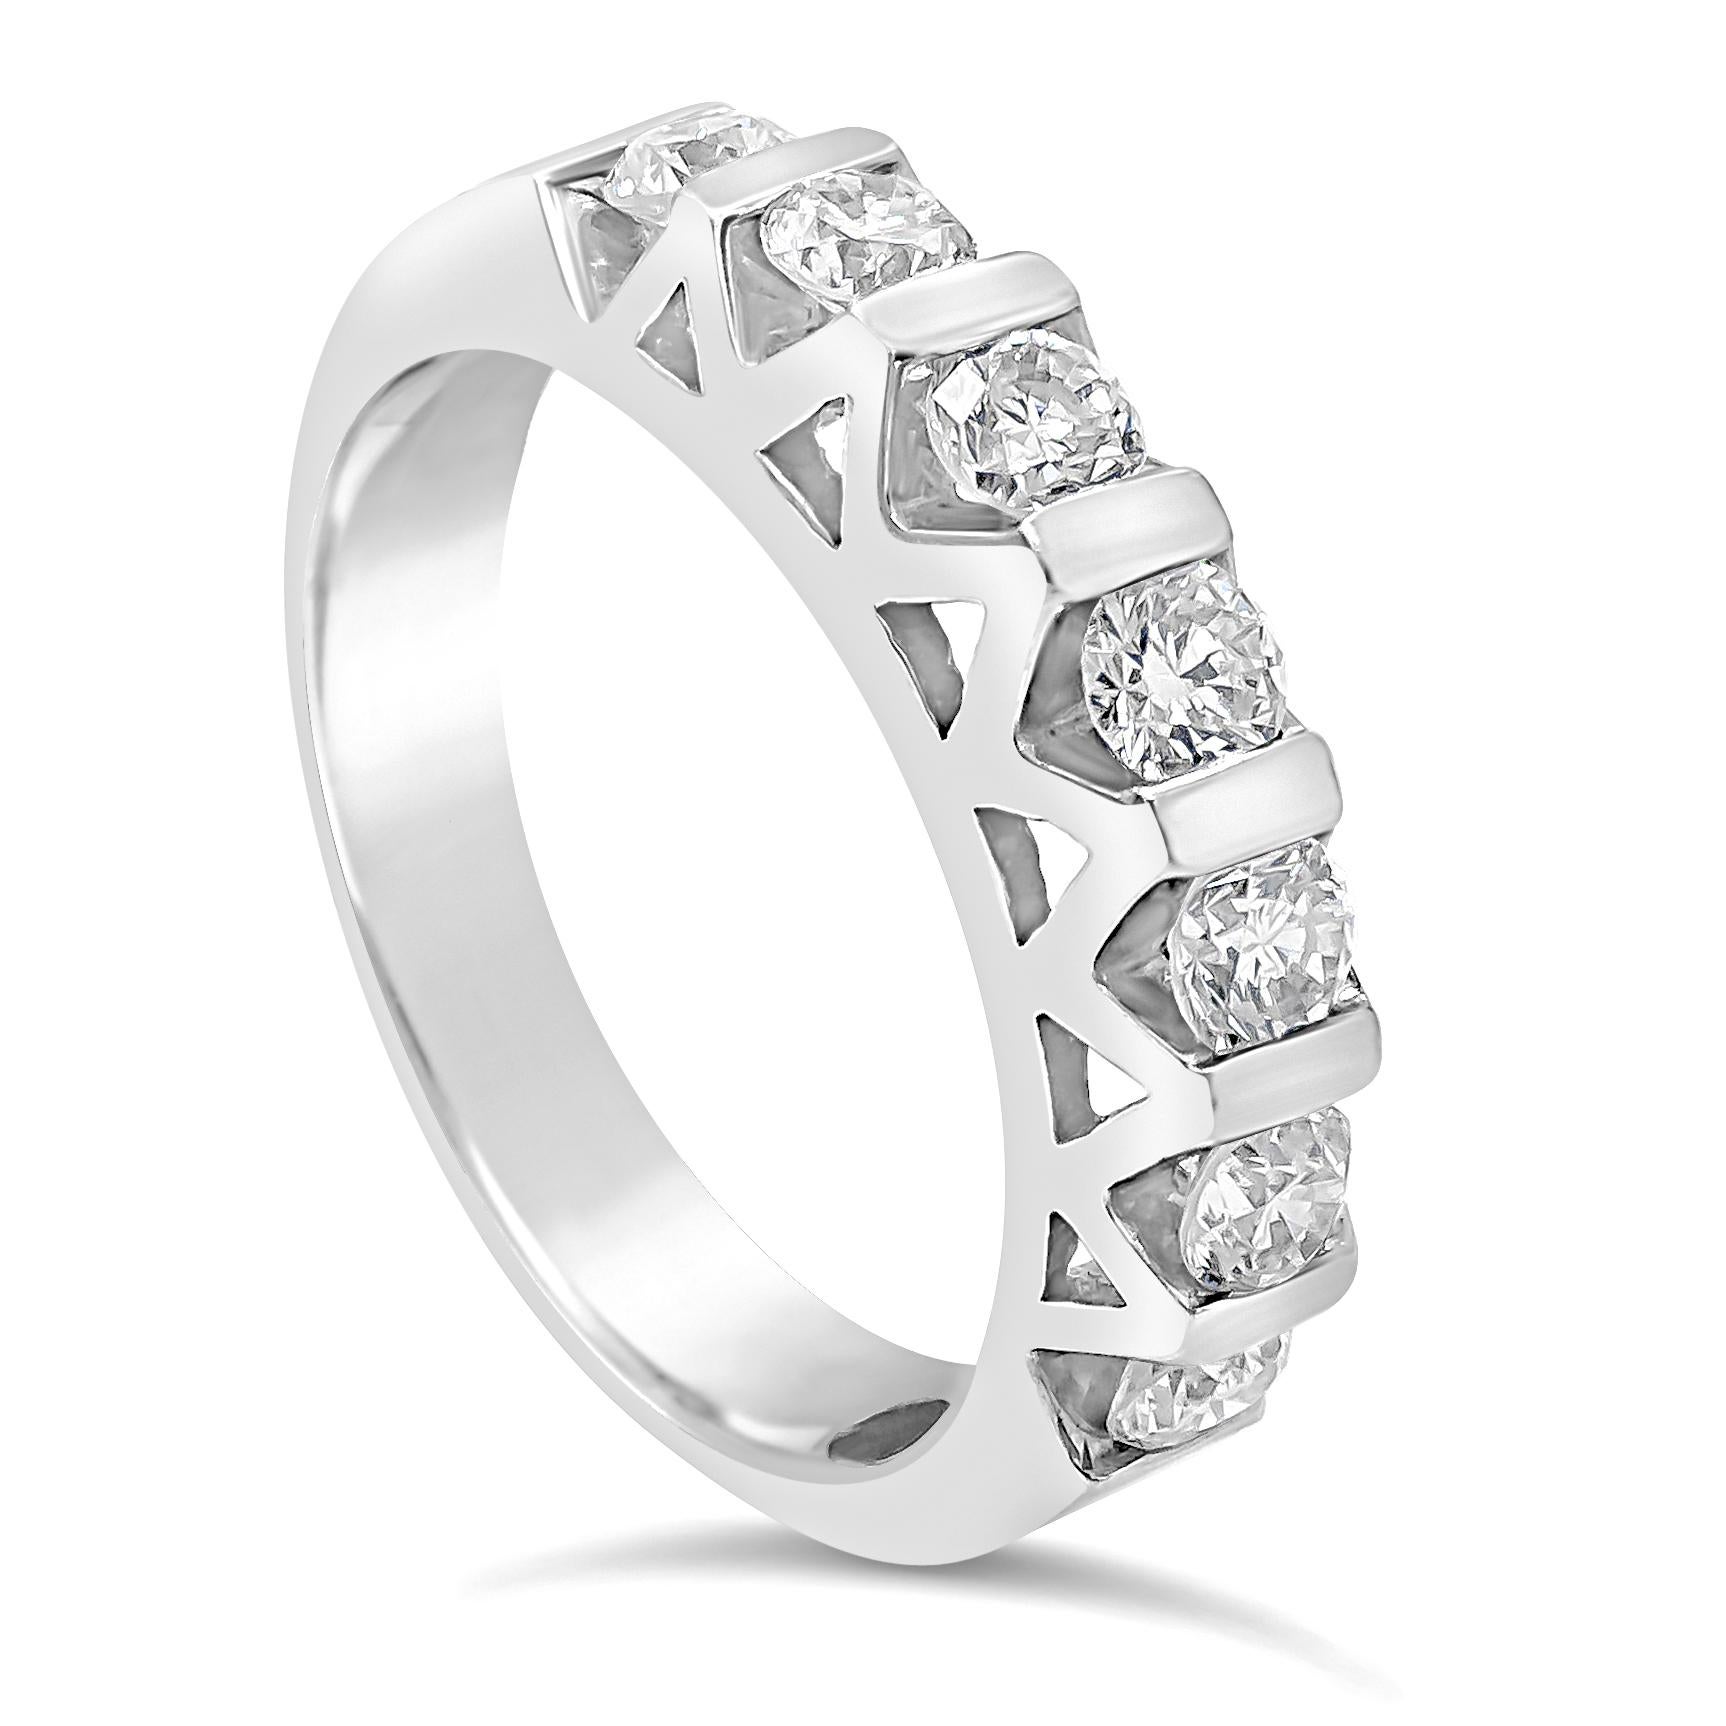 A unique and chic wedding band showcasing seven round brilliant diamonds, Diamonds weigh 0.80 carats total. Each bar is connected to form a creative geometrical shape on the ring. Made with 14K White Gold. Size 7 US.

Roman Malakov is a custom